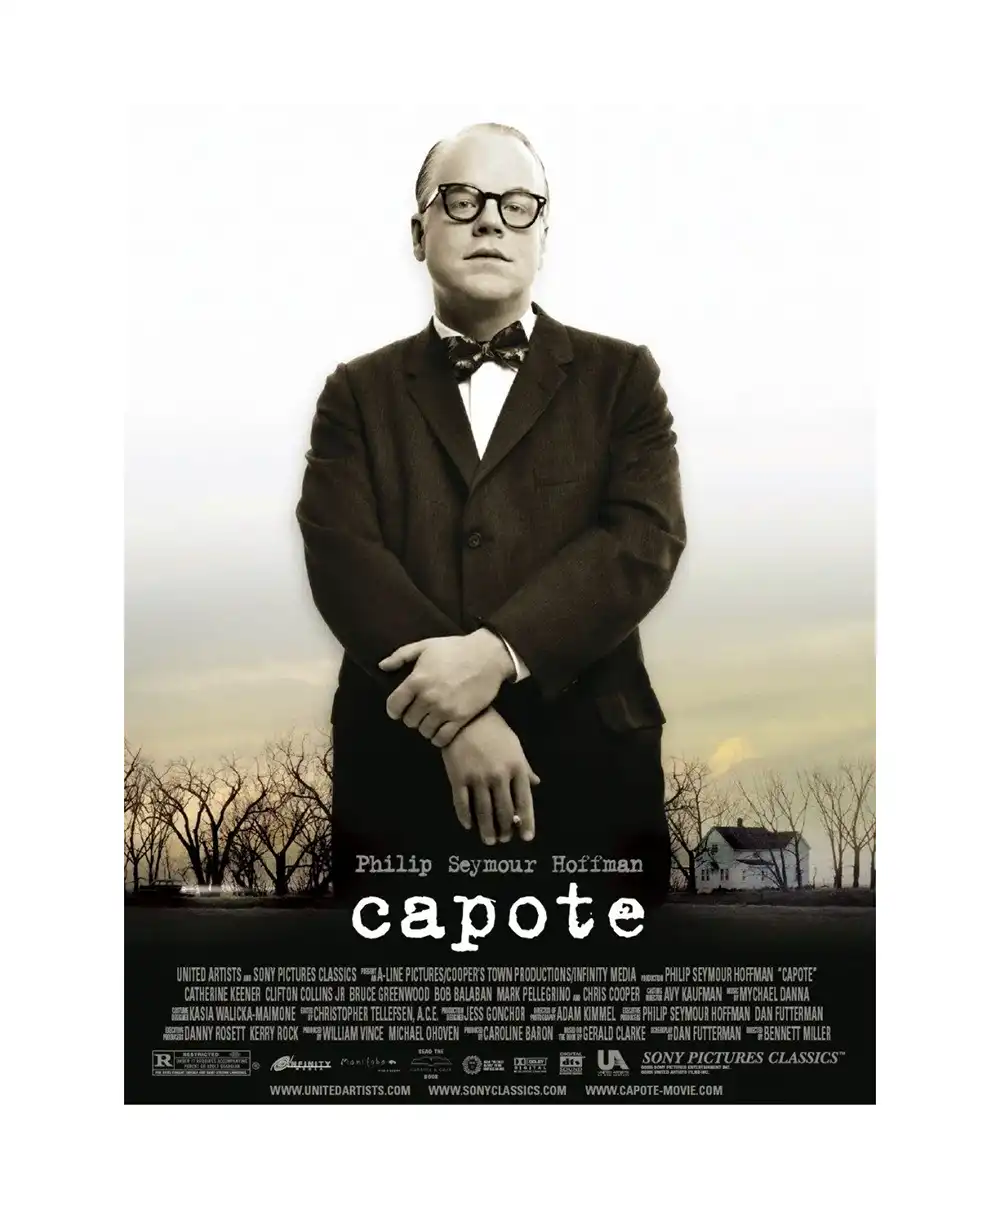 Poster for the movie Capote, 2005.